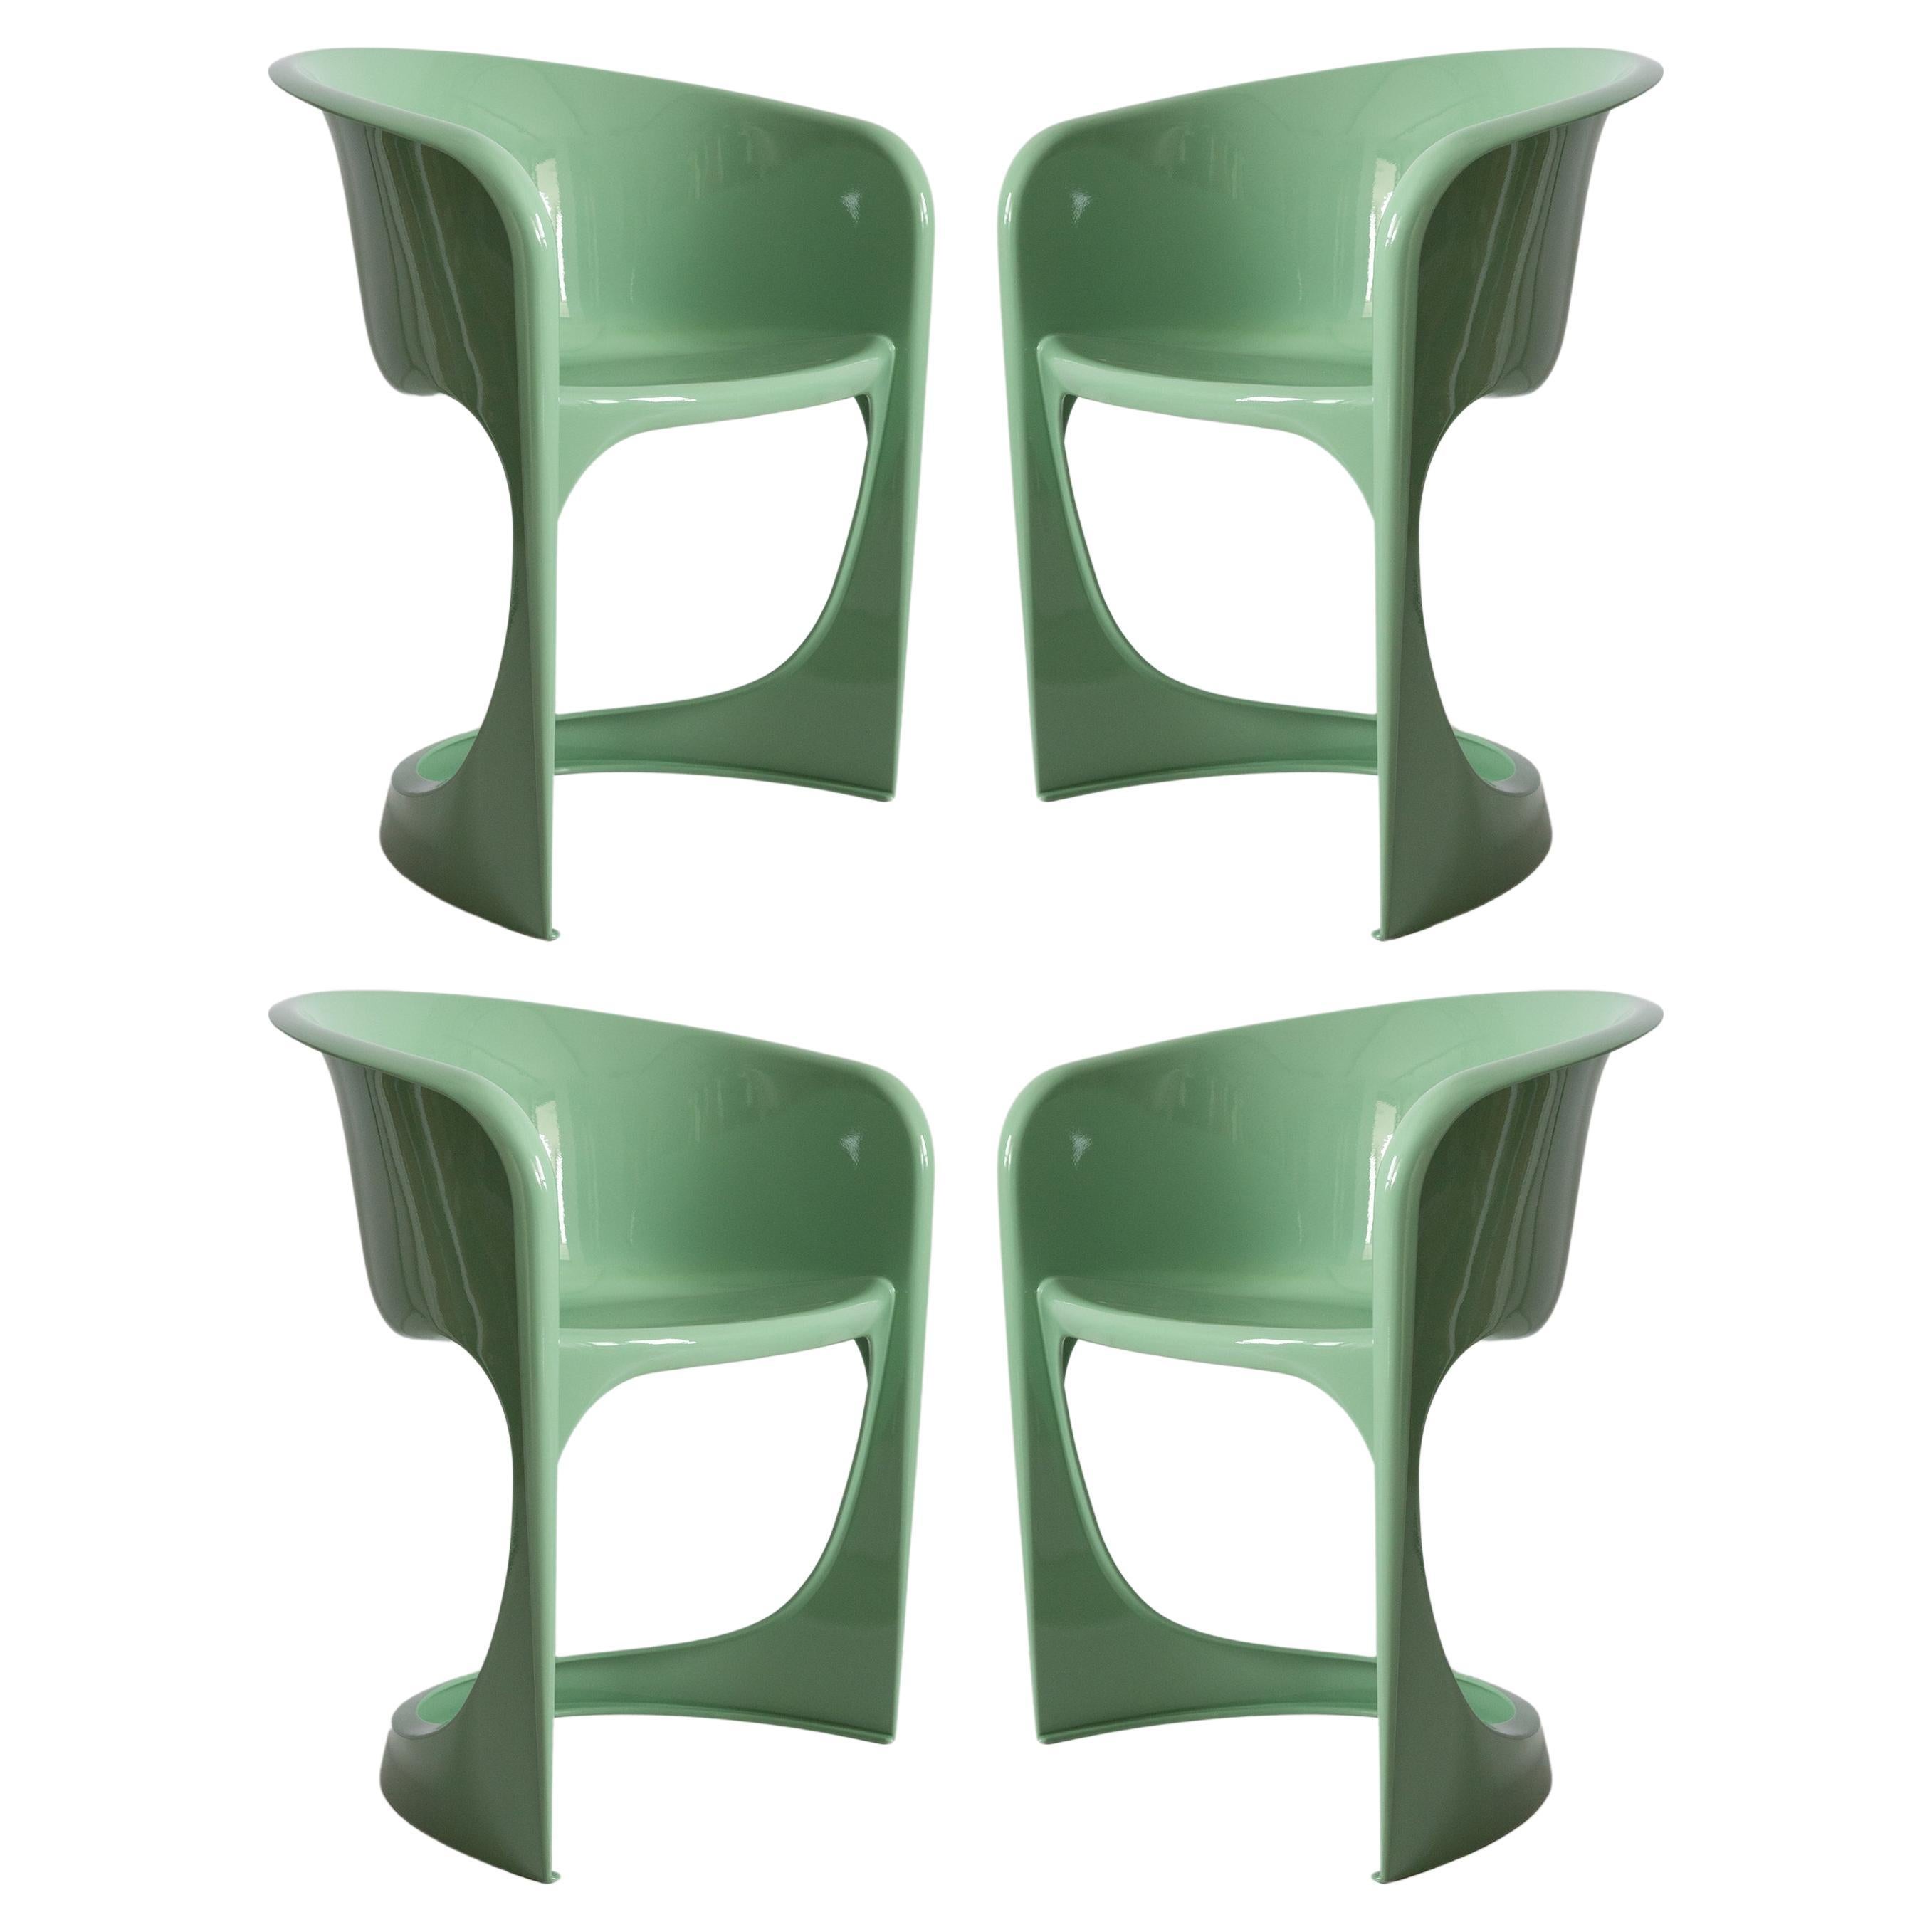 Set of Four Mid Century Glossy Mint Green Cado Chairs, Steen Østergaard, 1974